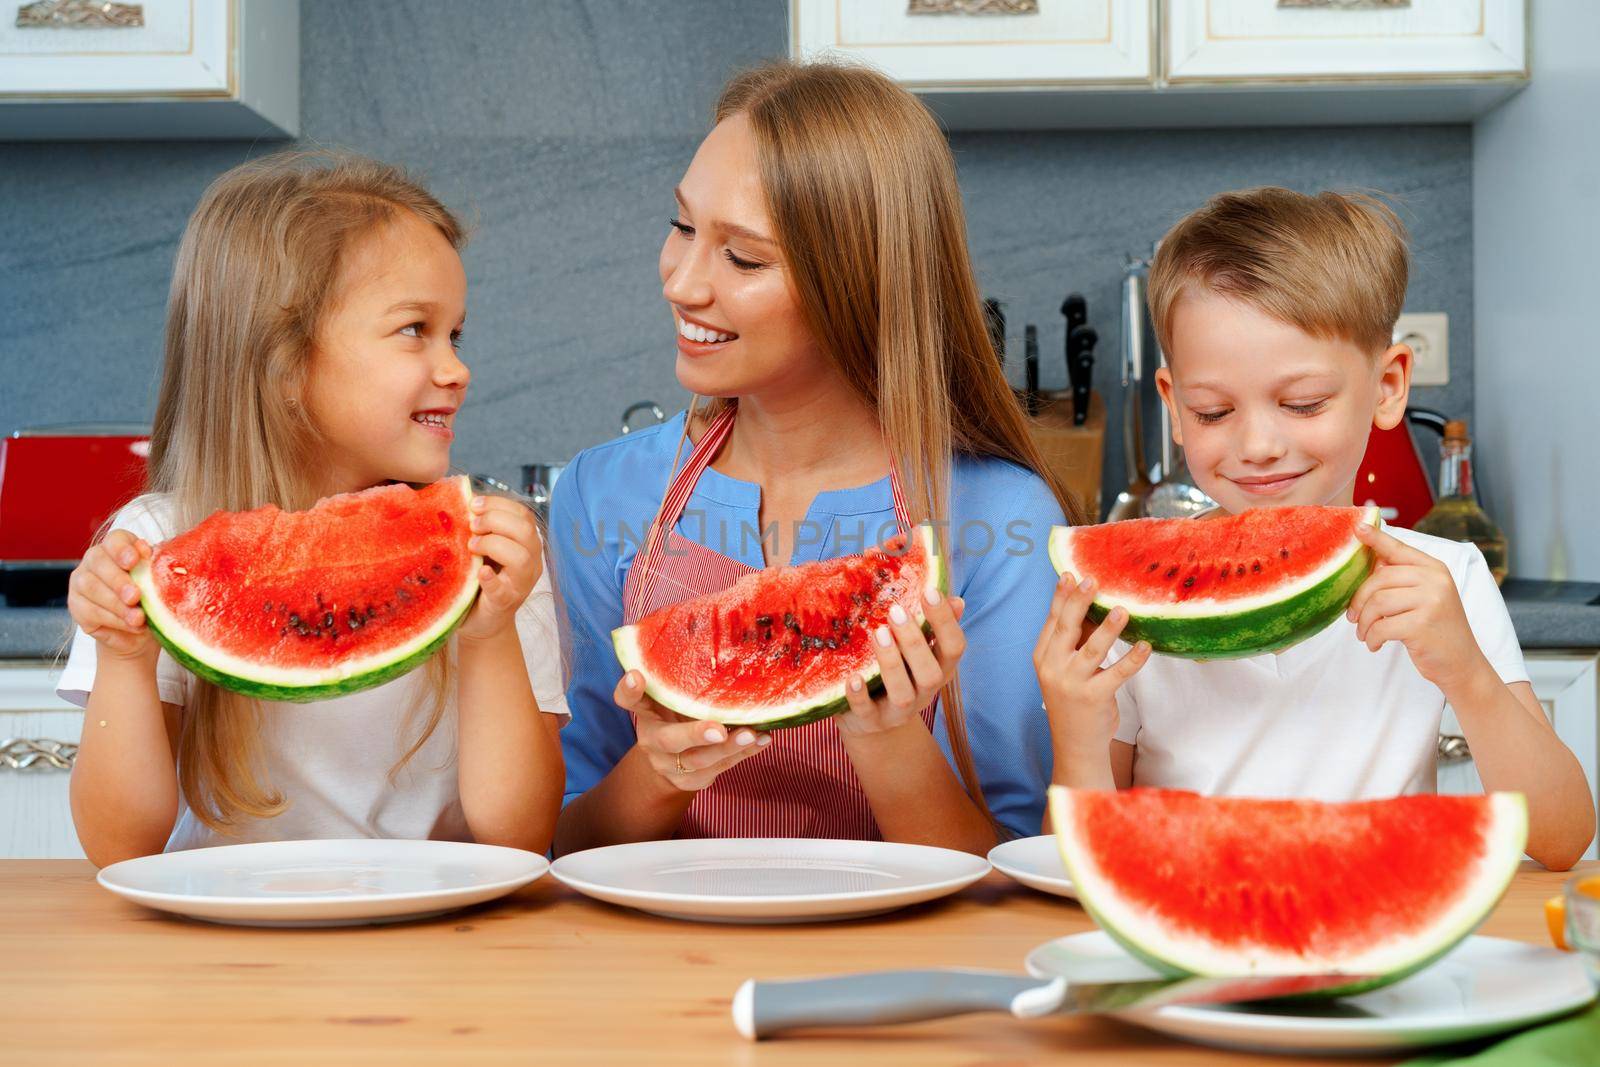 Sweet family, mother and her kids eating watermelon in their kitchen having fun, close up